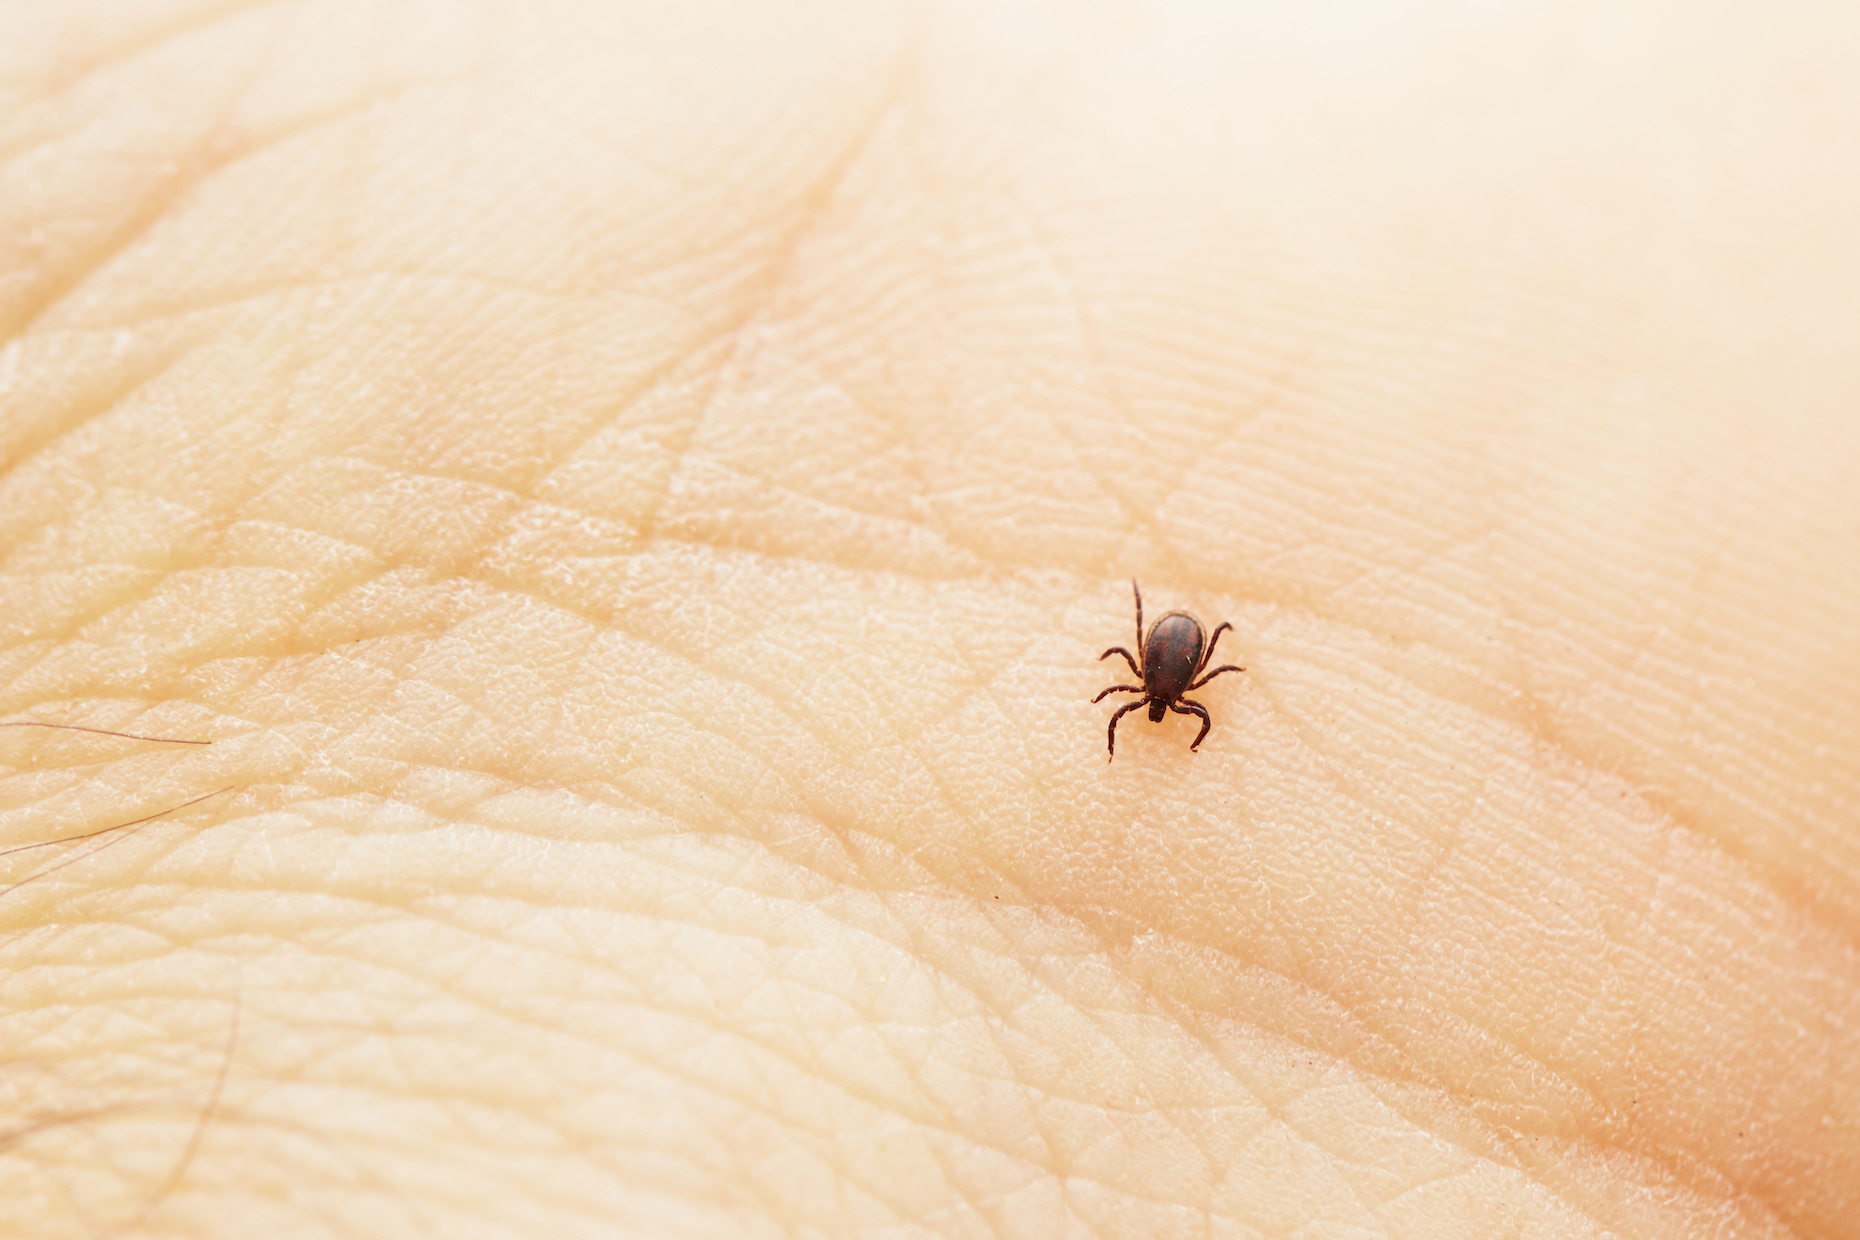 20 facts about Lyme disease